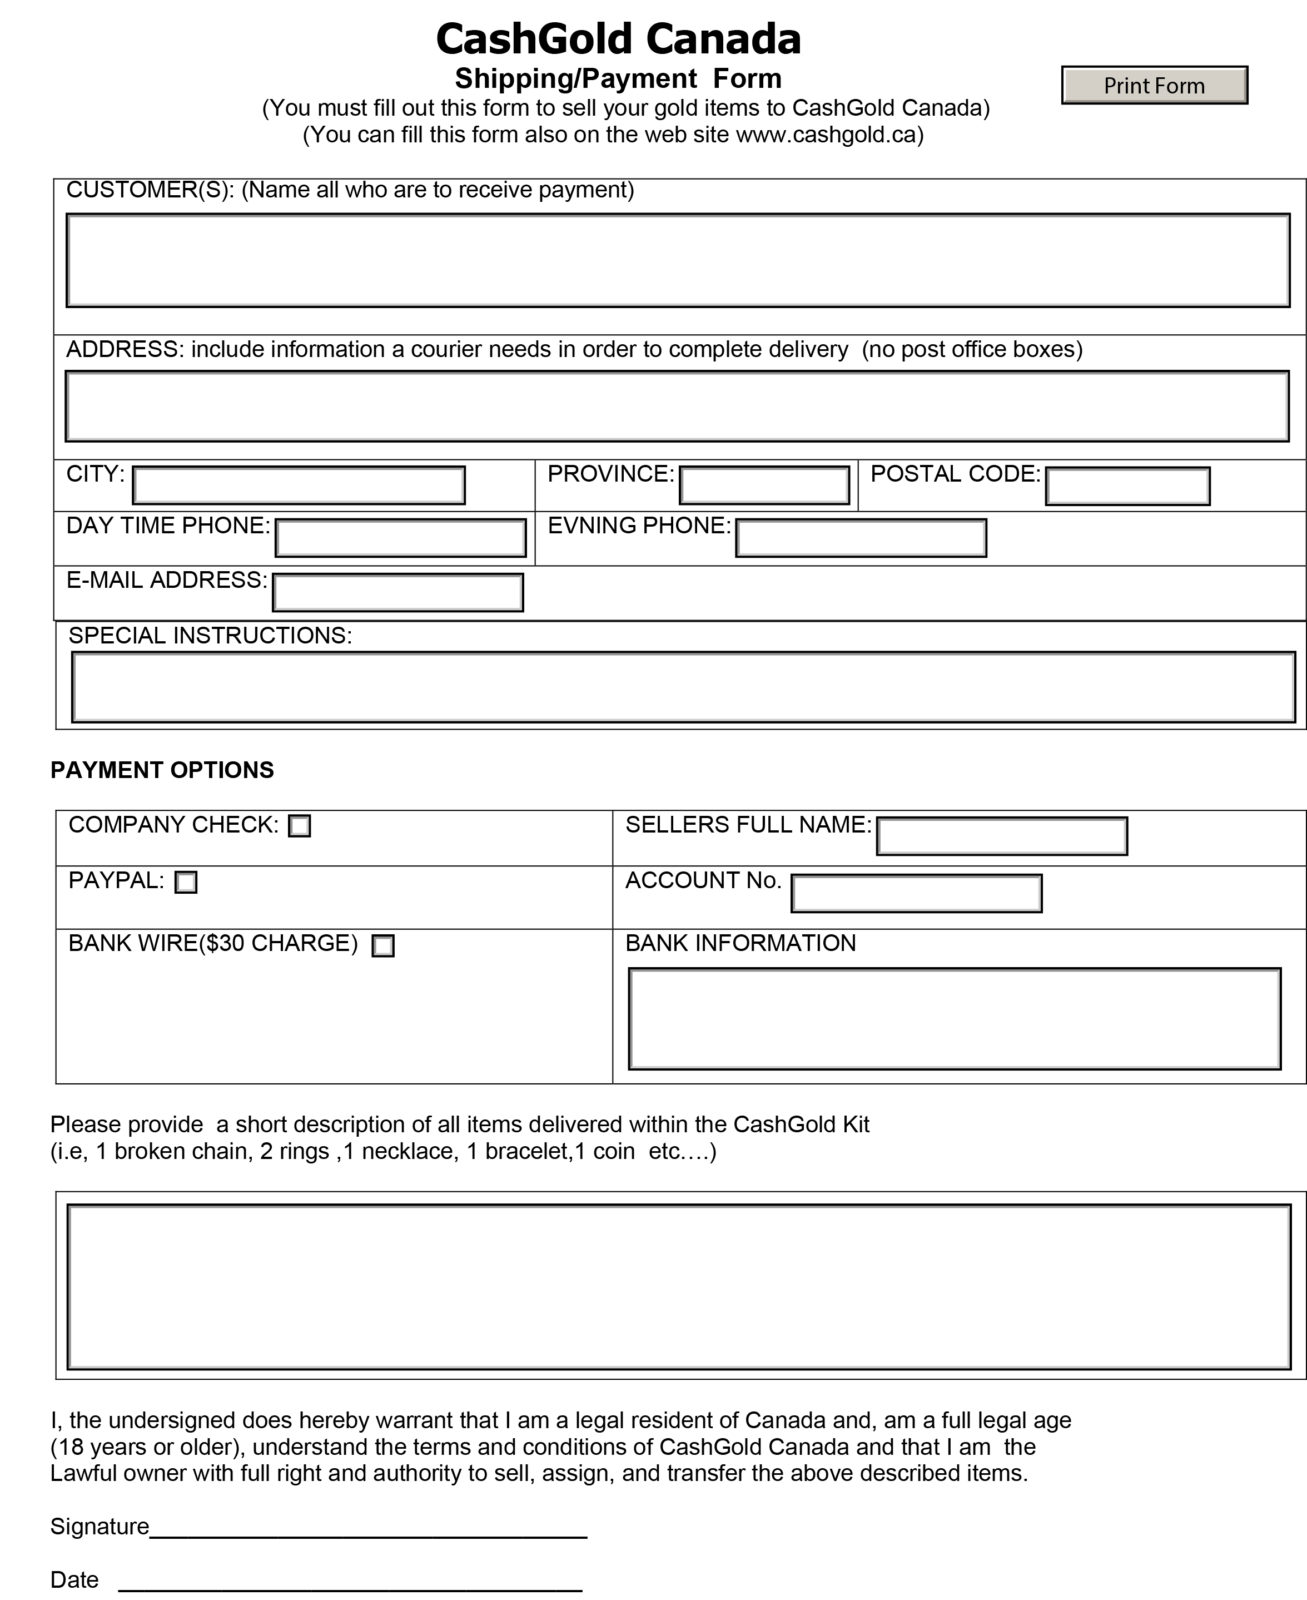 Microsoft Word - shipping payment form cashgoldpaul